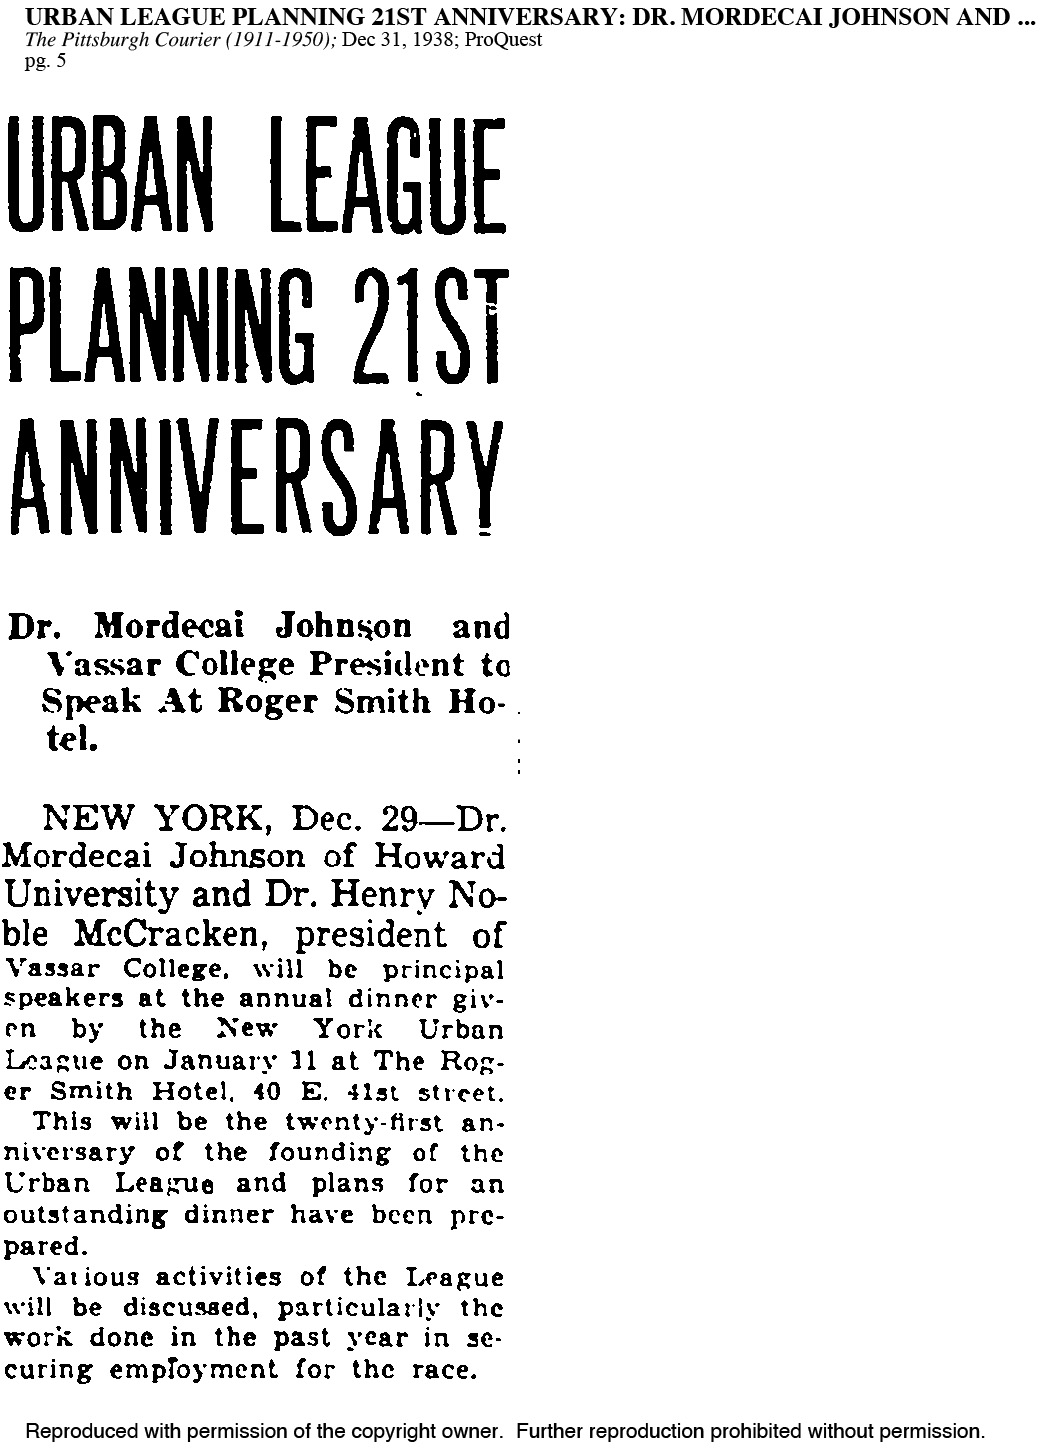 Original article scan for Urban League Planning 21st Anniversary; The Pittsburgh Courier (1911-1950); Dec 31, 1938; ProQuest pg. 5